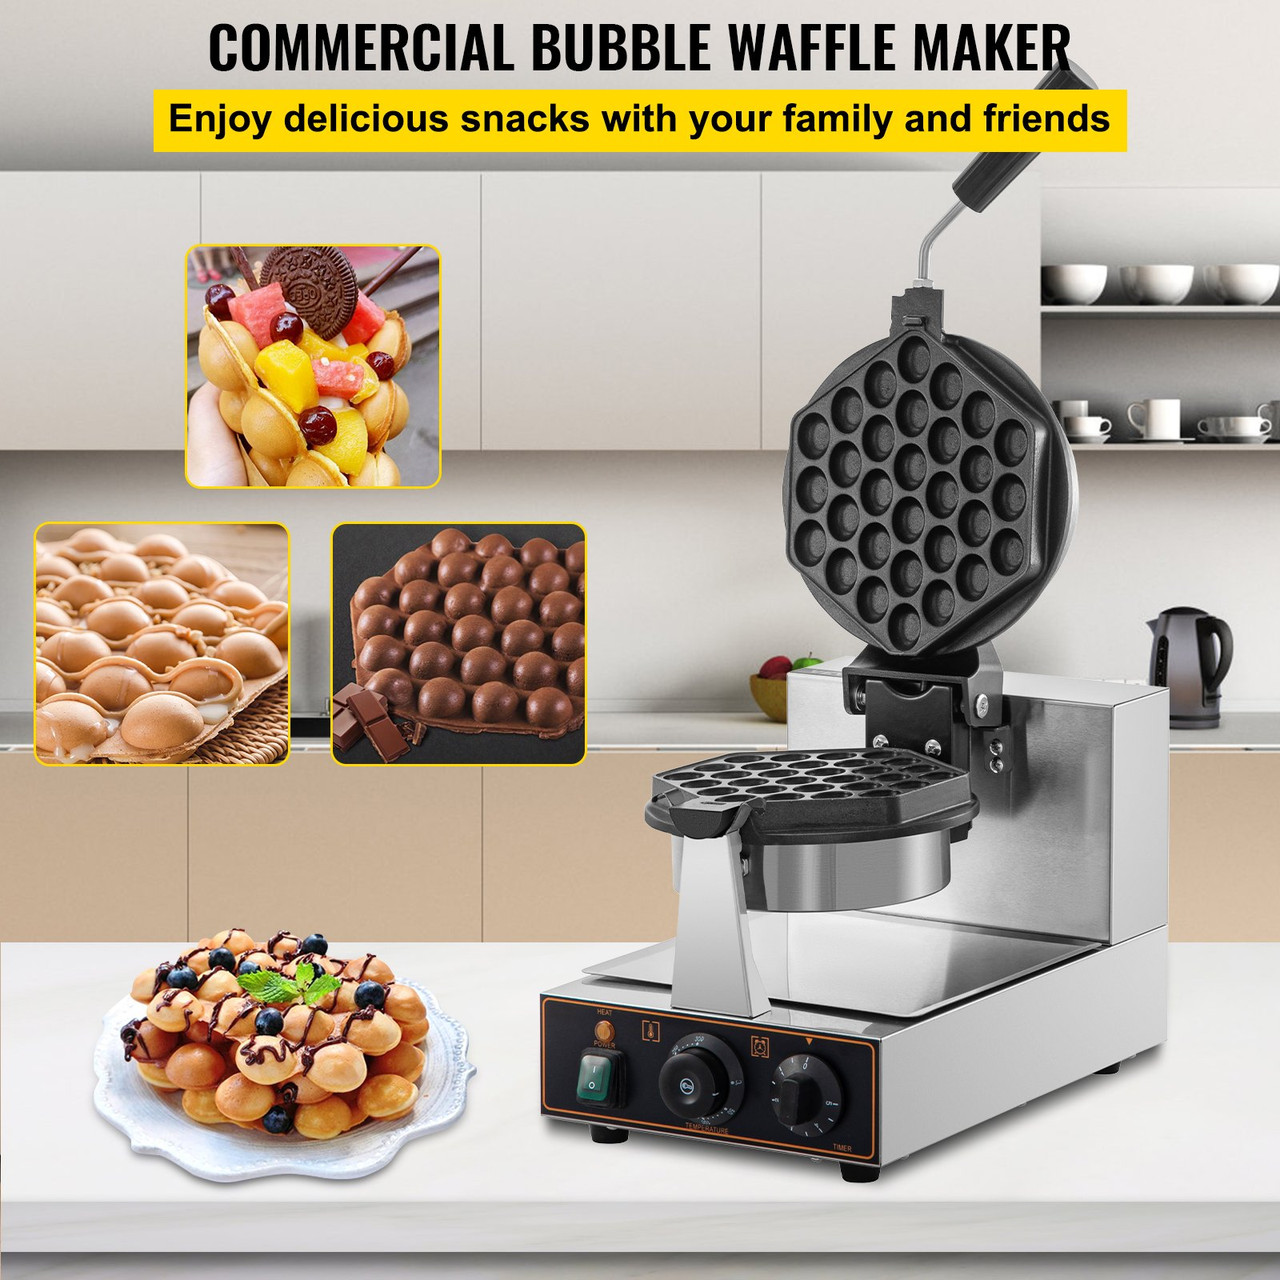 VEVOR Commercial Bubble Waffle Maker, Hexagonal Mould, 1200W Egg Bubble Puff Iron w/ 360°Rotatable 2 Pans & Bent Handles, Stainless Steel Baker w/ Non-Stick Teflon Coating, 50-300?/122-572? Adjustable